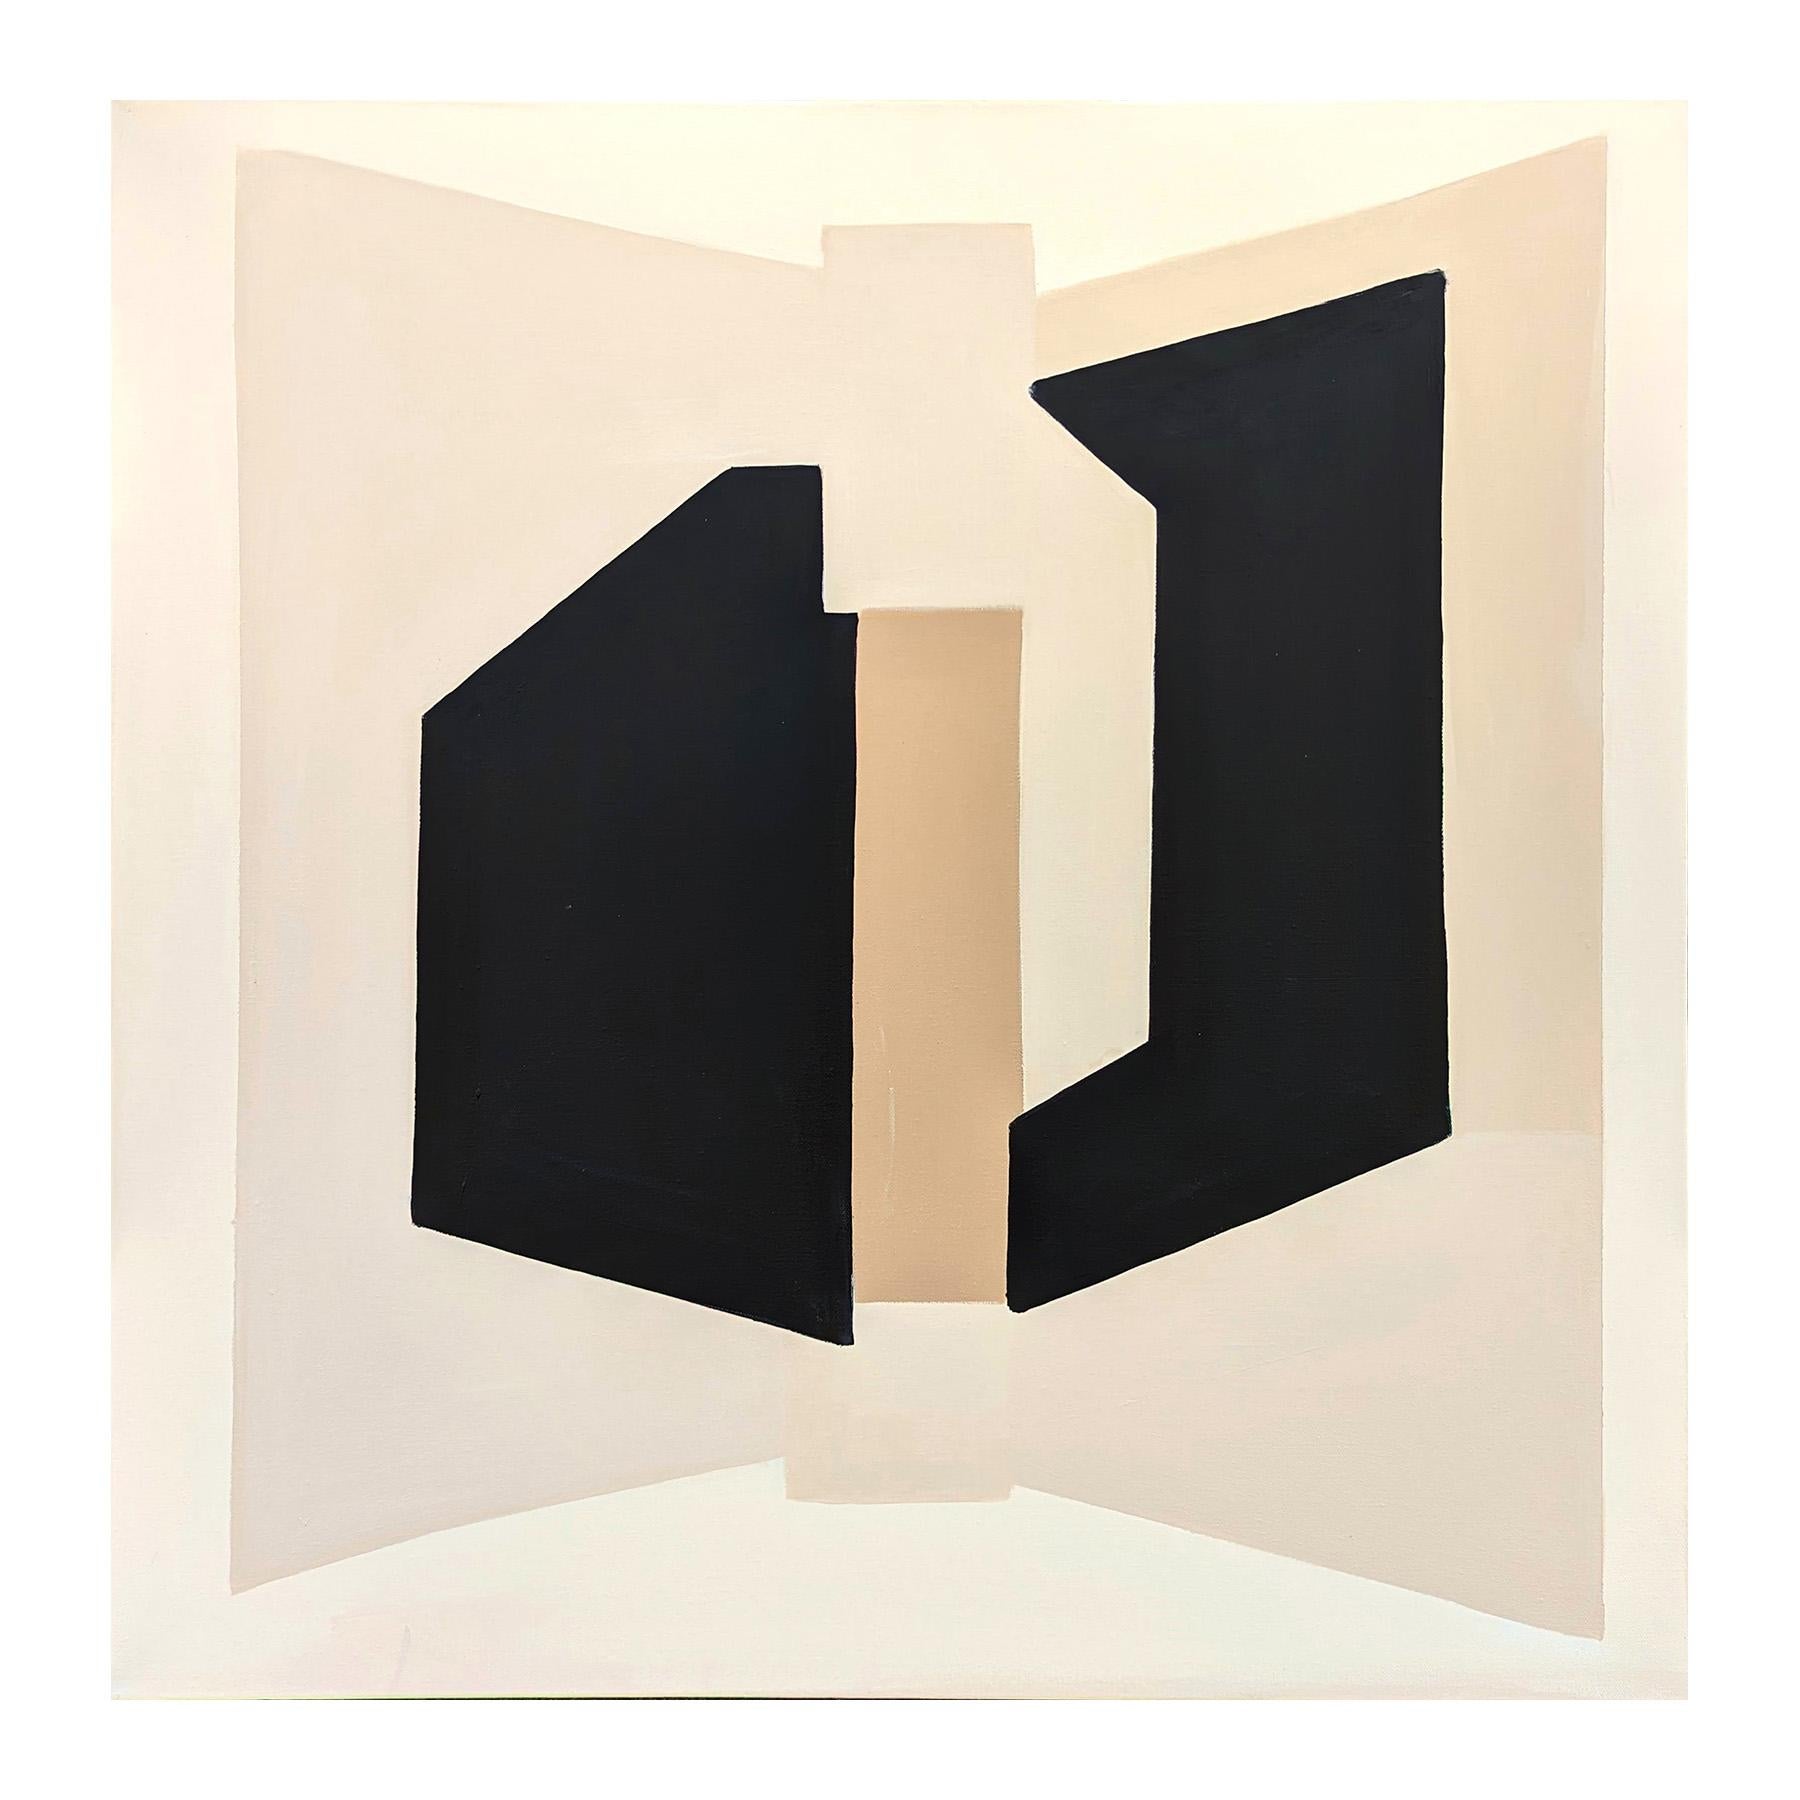 Geometric abstract painting by contemporary artist Stephanie Beukers. The work features layers of hard-edged shapes in black and tan set against a light background. Signed and titled on the reverse. Currently unframed, but options are